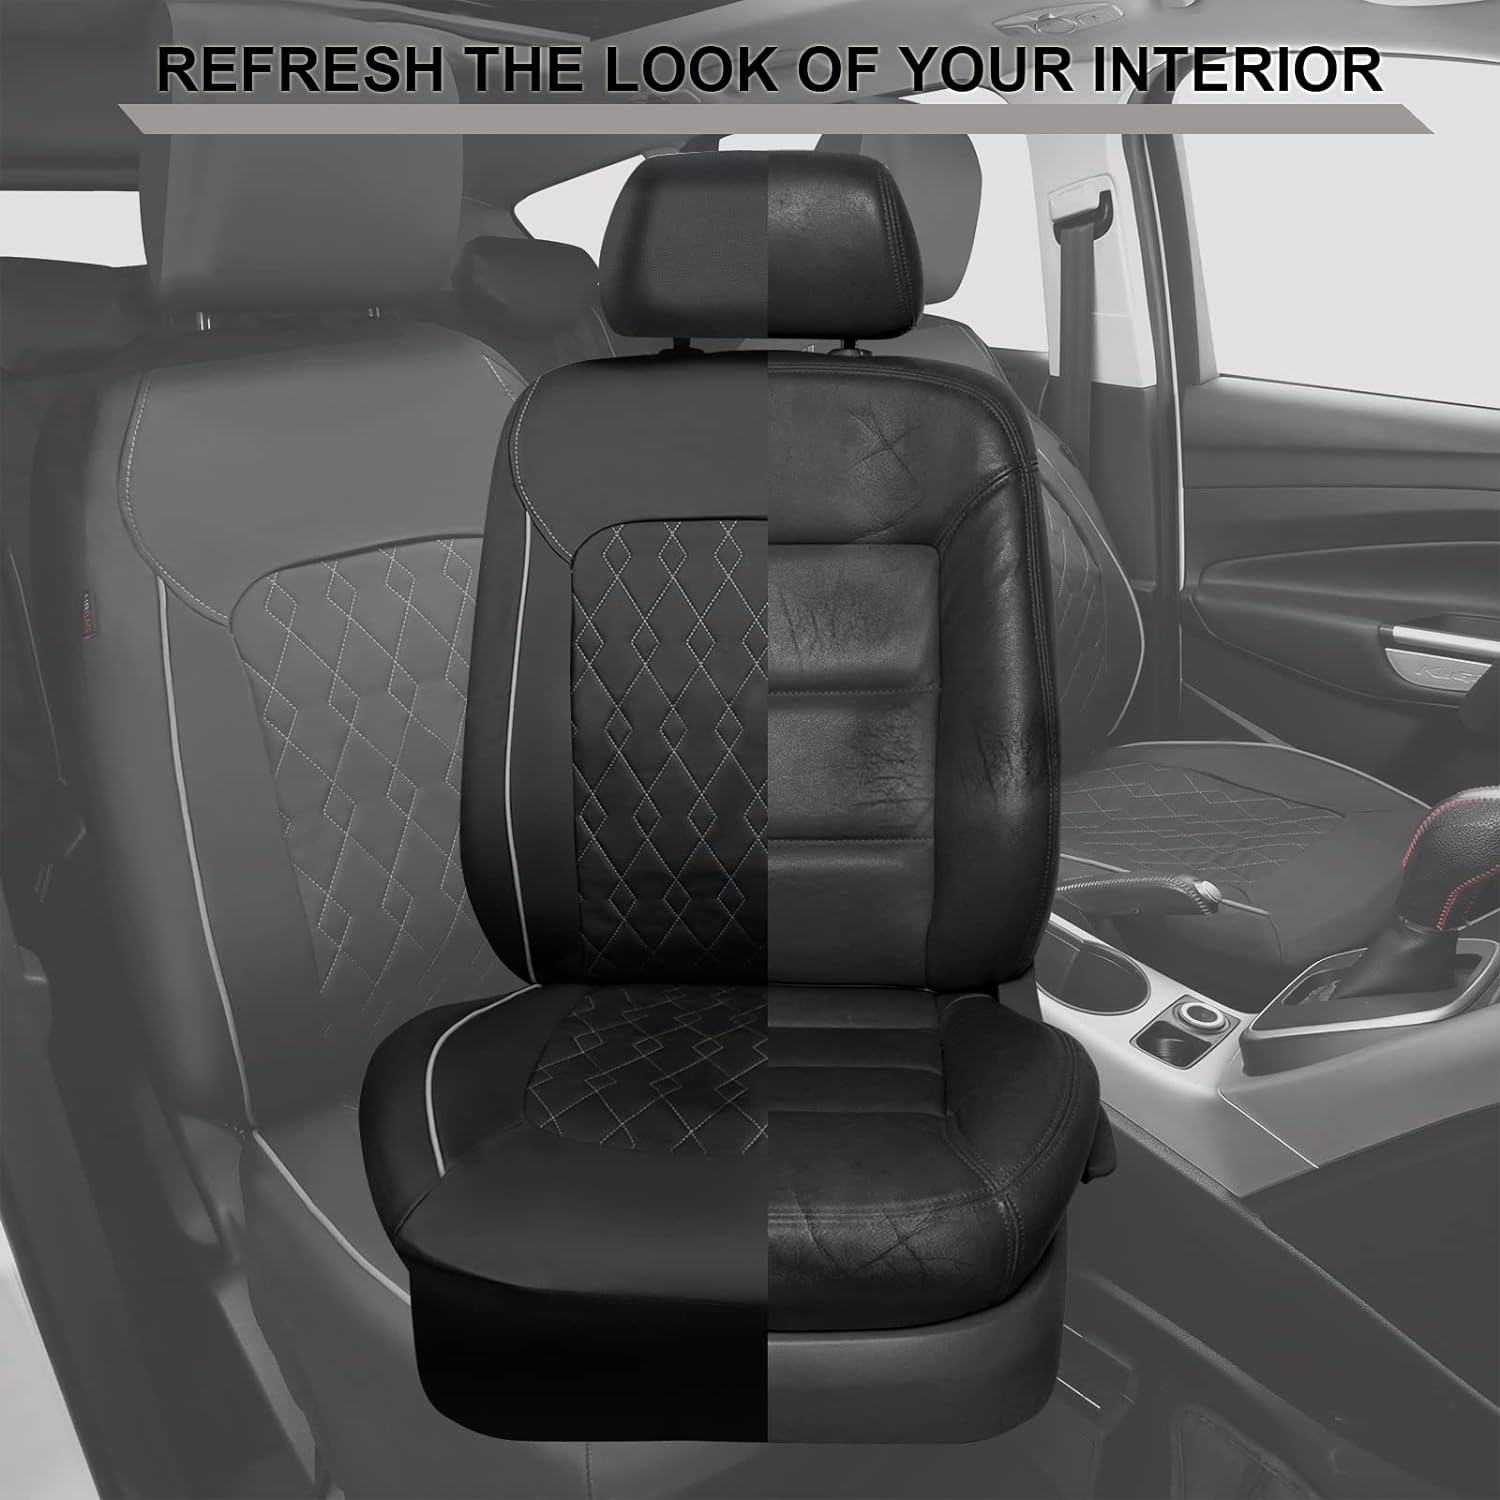 CAR PASS PU Leather Car Seat Covers Full Set Fit Most Cars Trucks SUVS Auto Seat Covers Set Car Seat Protector Car Seat Cover with Zipper Design, Airbag Compatible (Full seat Black Gray)